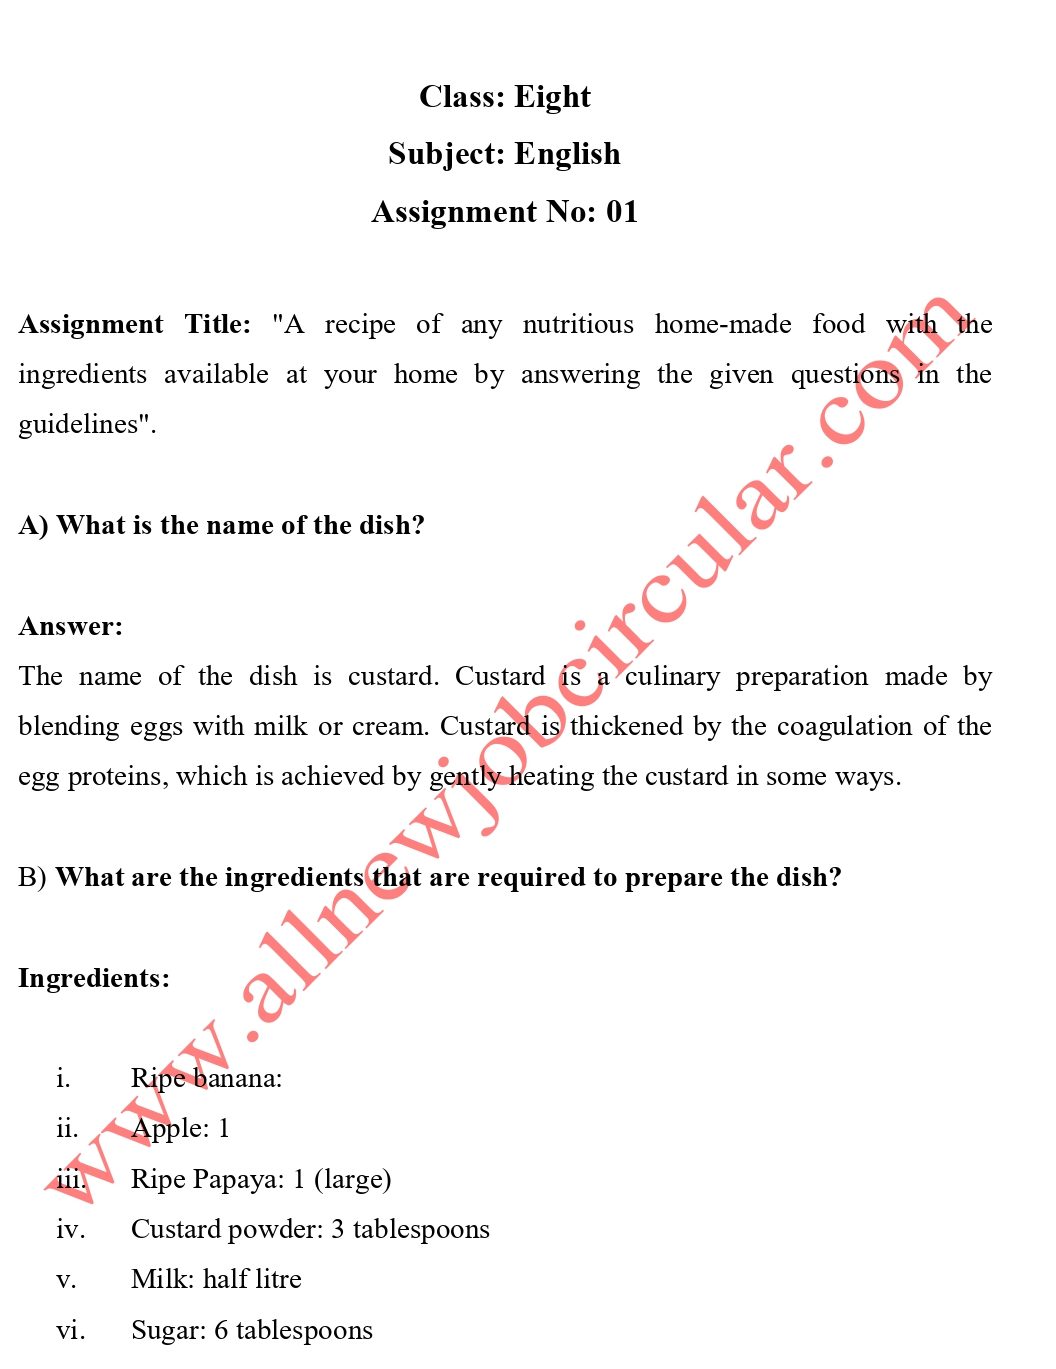 class 8 assignment 2nd week 2022 english answer_page-0001